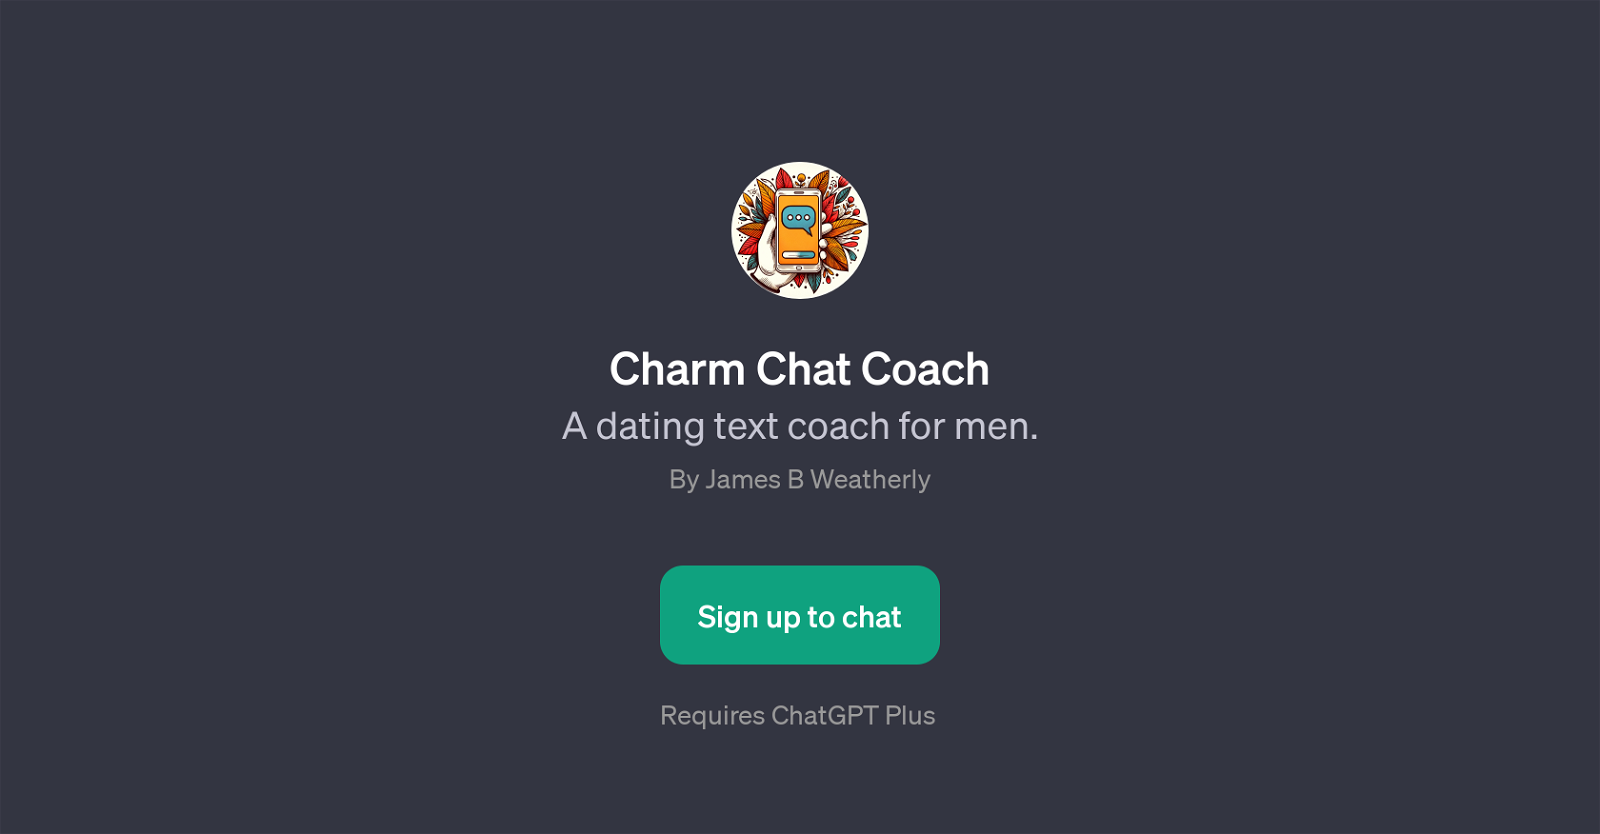 Charm Chat Coach website